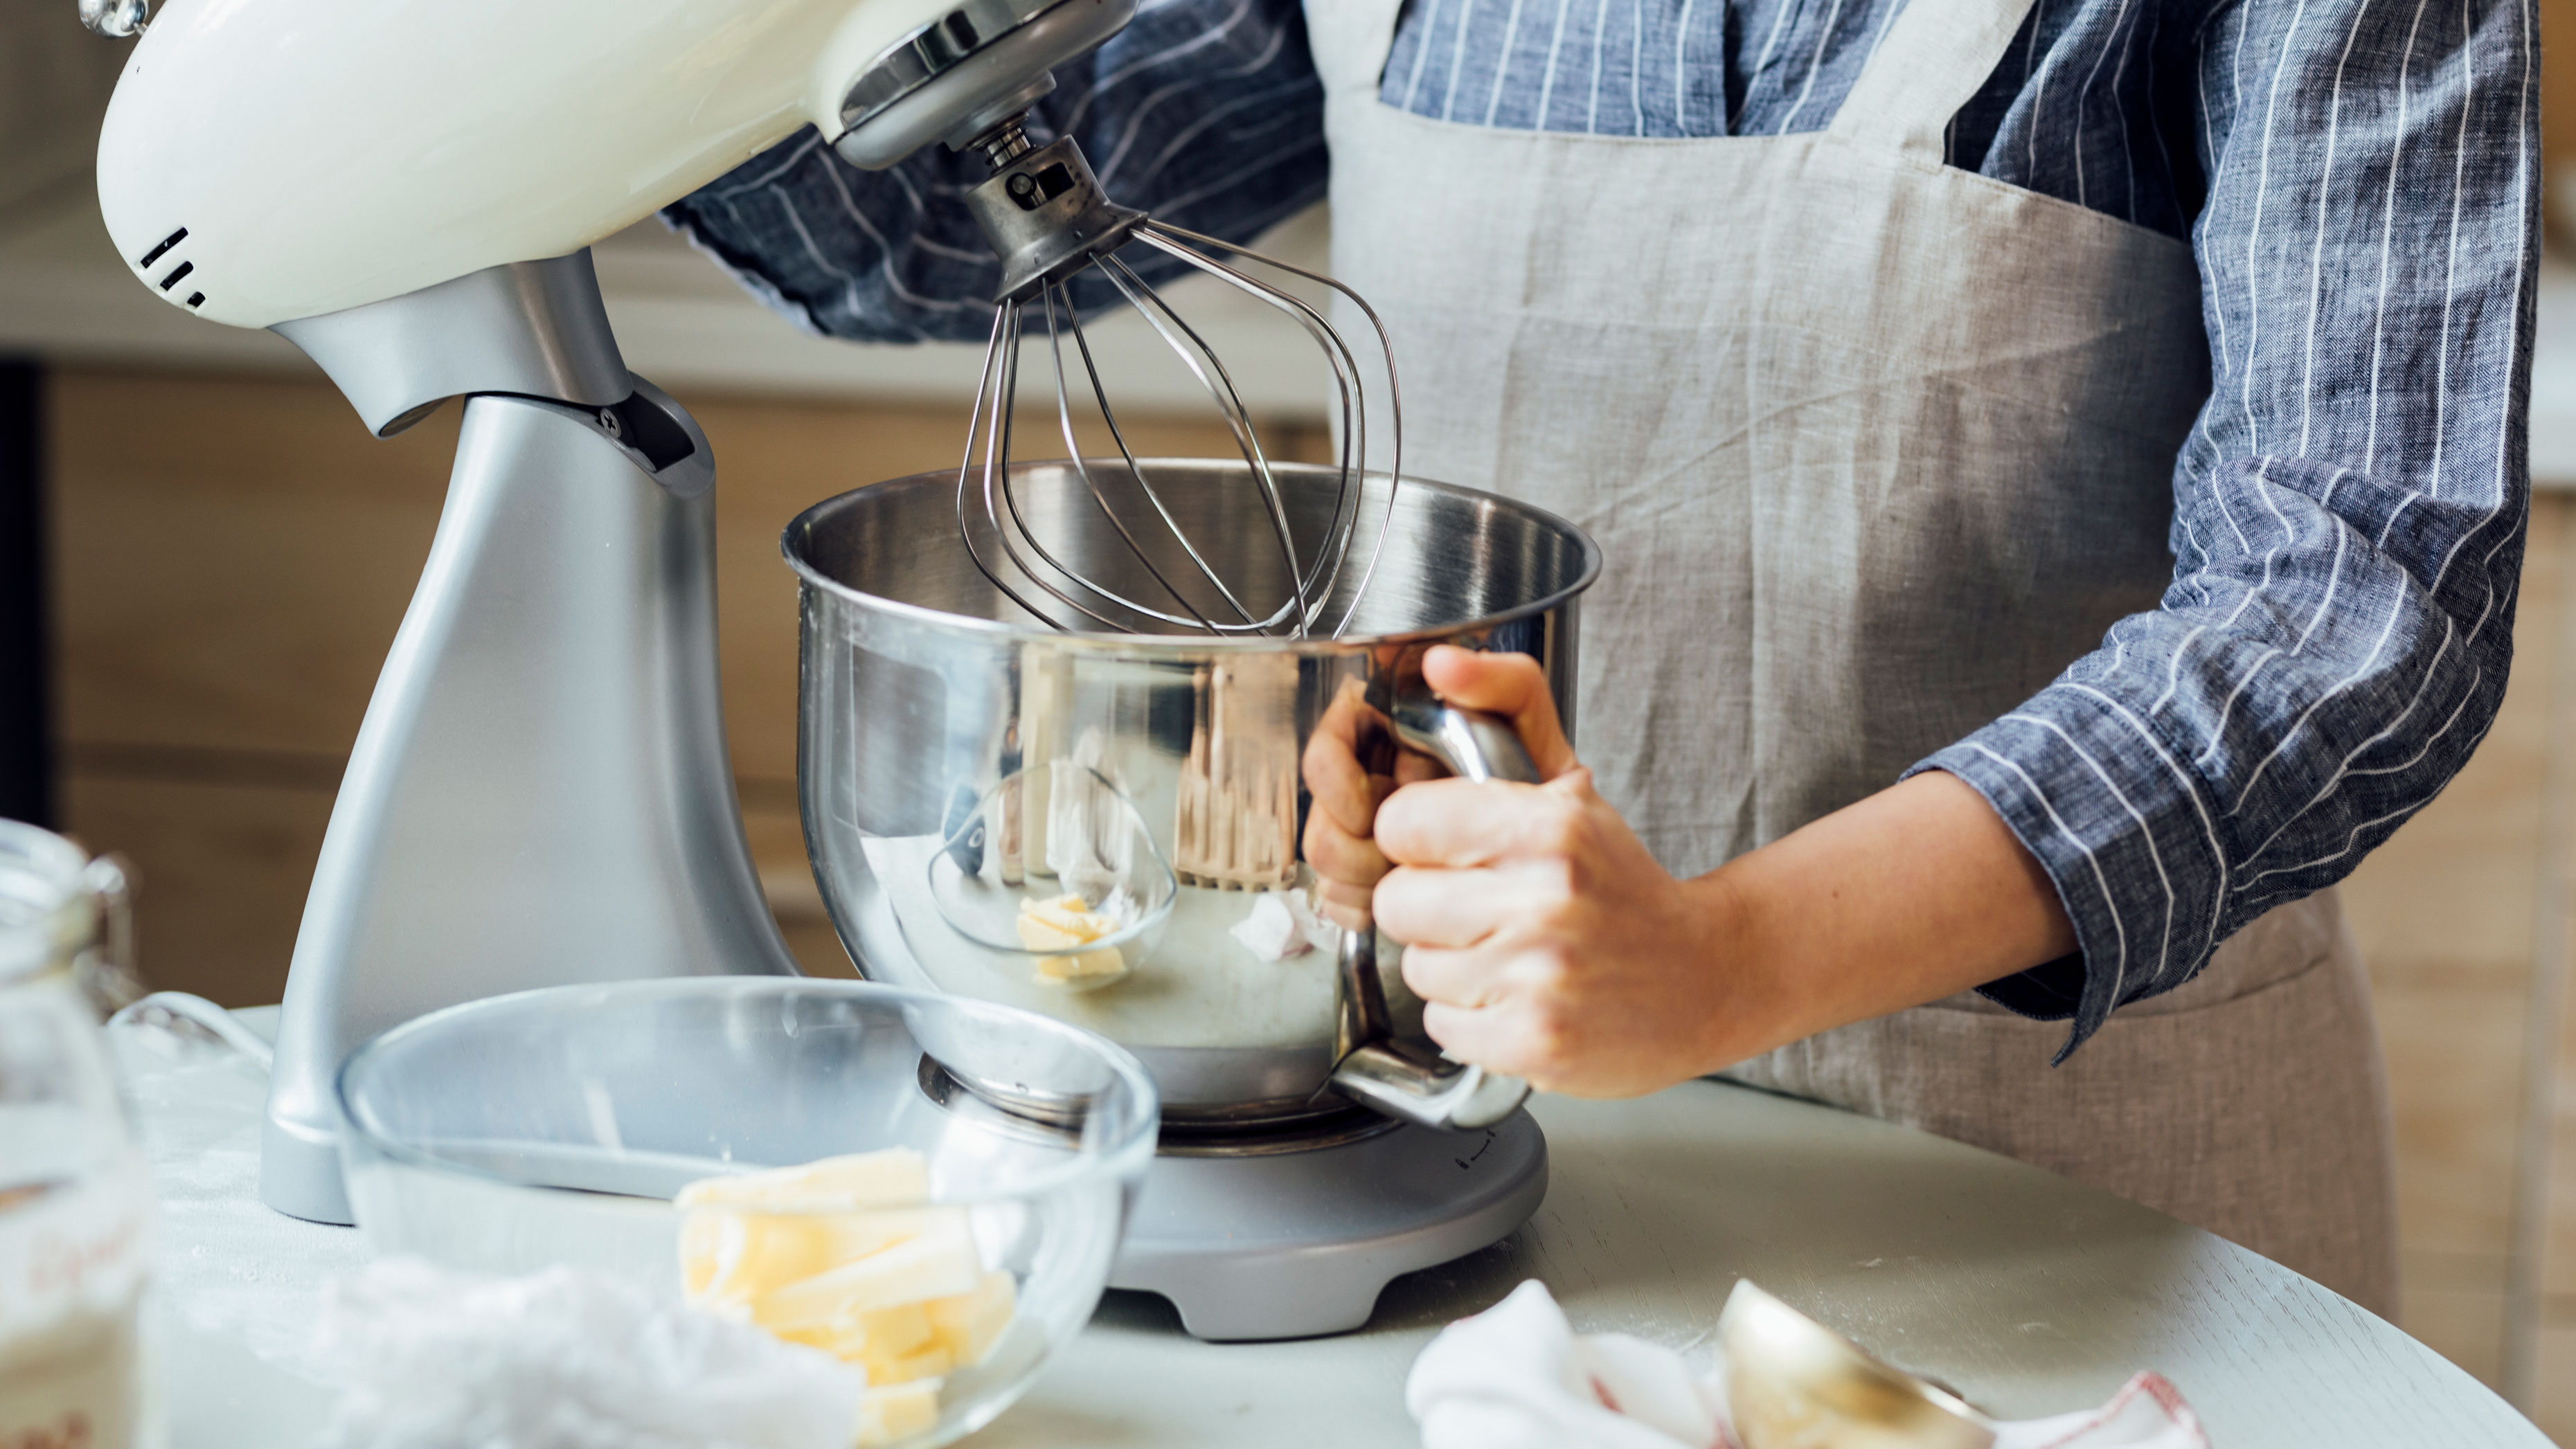 Where to buy a stand mixer